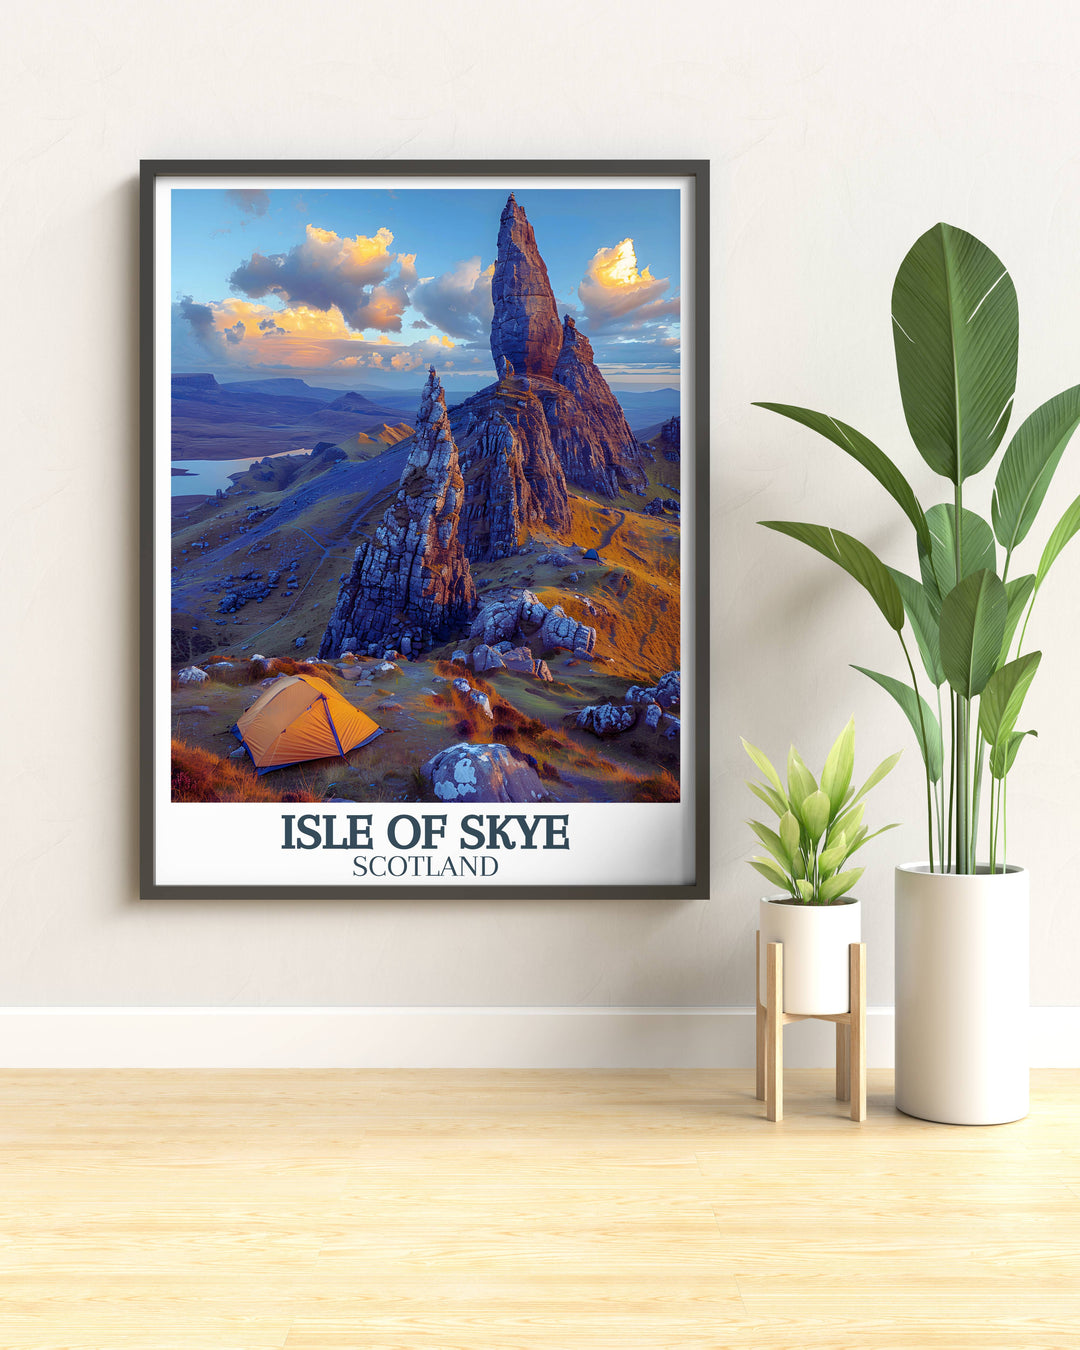 Custom print of The Old Man of Storr tailored to fit modern home decor styles featuring Scottish natural wonders